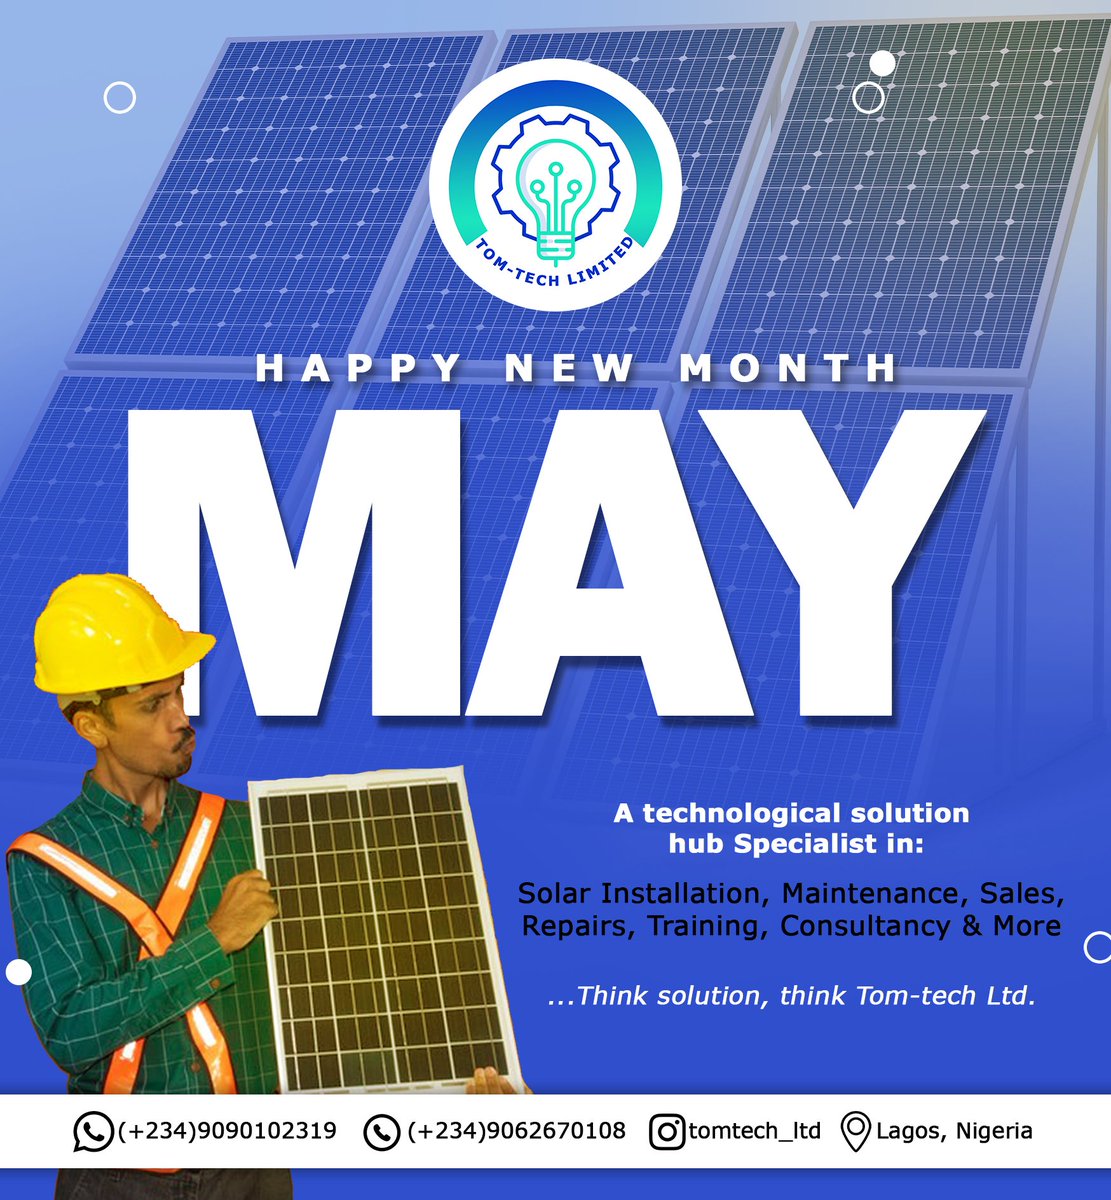 Happy International workers day and a new month of May!

Think solutions, think Tomtech Limited. 

© Tomtech Limited

#gregoryoseremeikpea#tomtech_ltd #christian #RenewableRevolution #renewableenergyisthefuture #renewableresources #renewablepower #RenewableElectricity